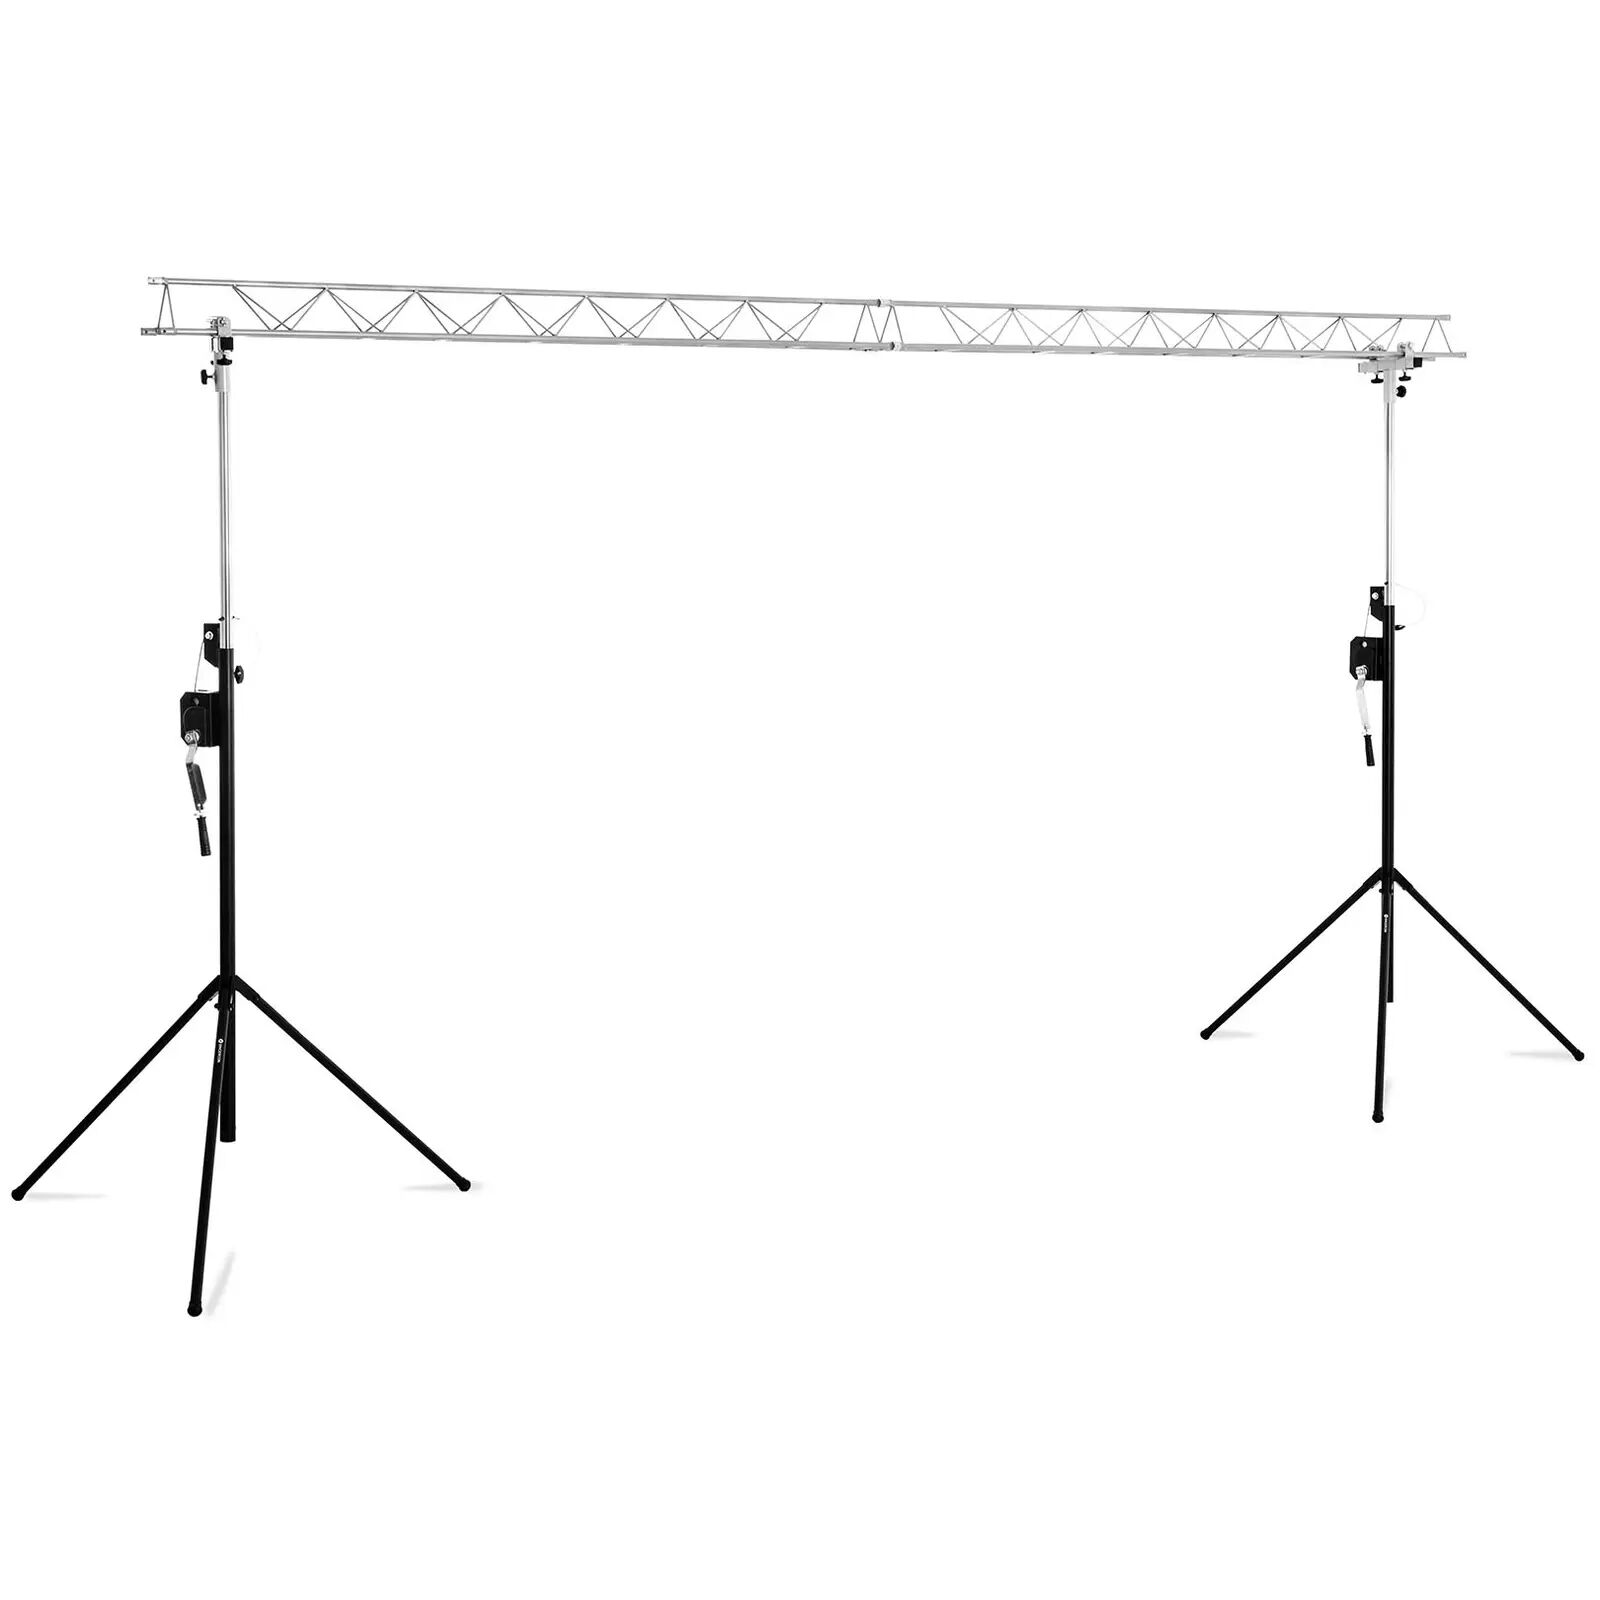 Singercon Stage Lighting Stand - up to 100 kg - elevator tripod - 1.80 to 3 m - truss CON.LS3000E1.03